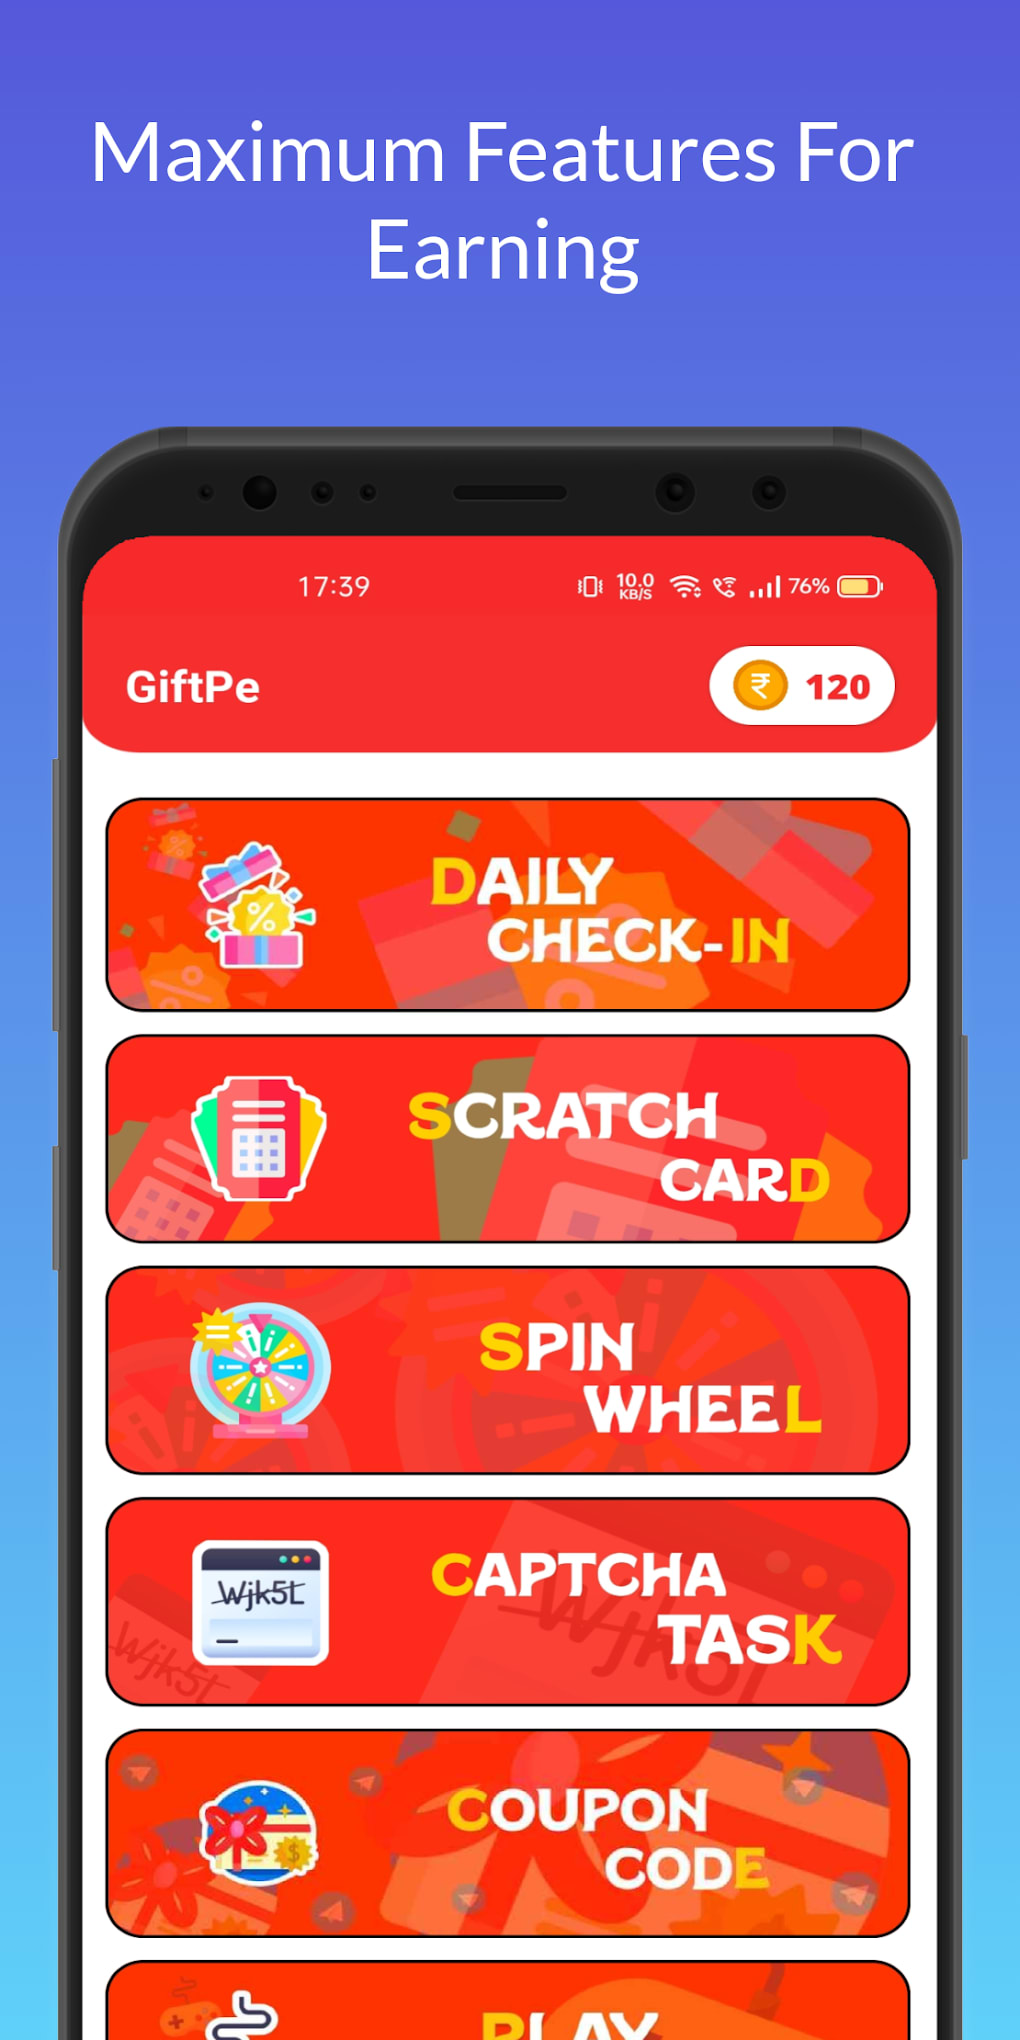 GiftCode - Earn Game Codes for Android - Download